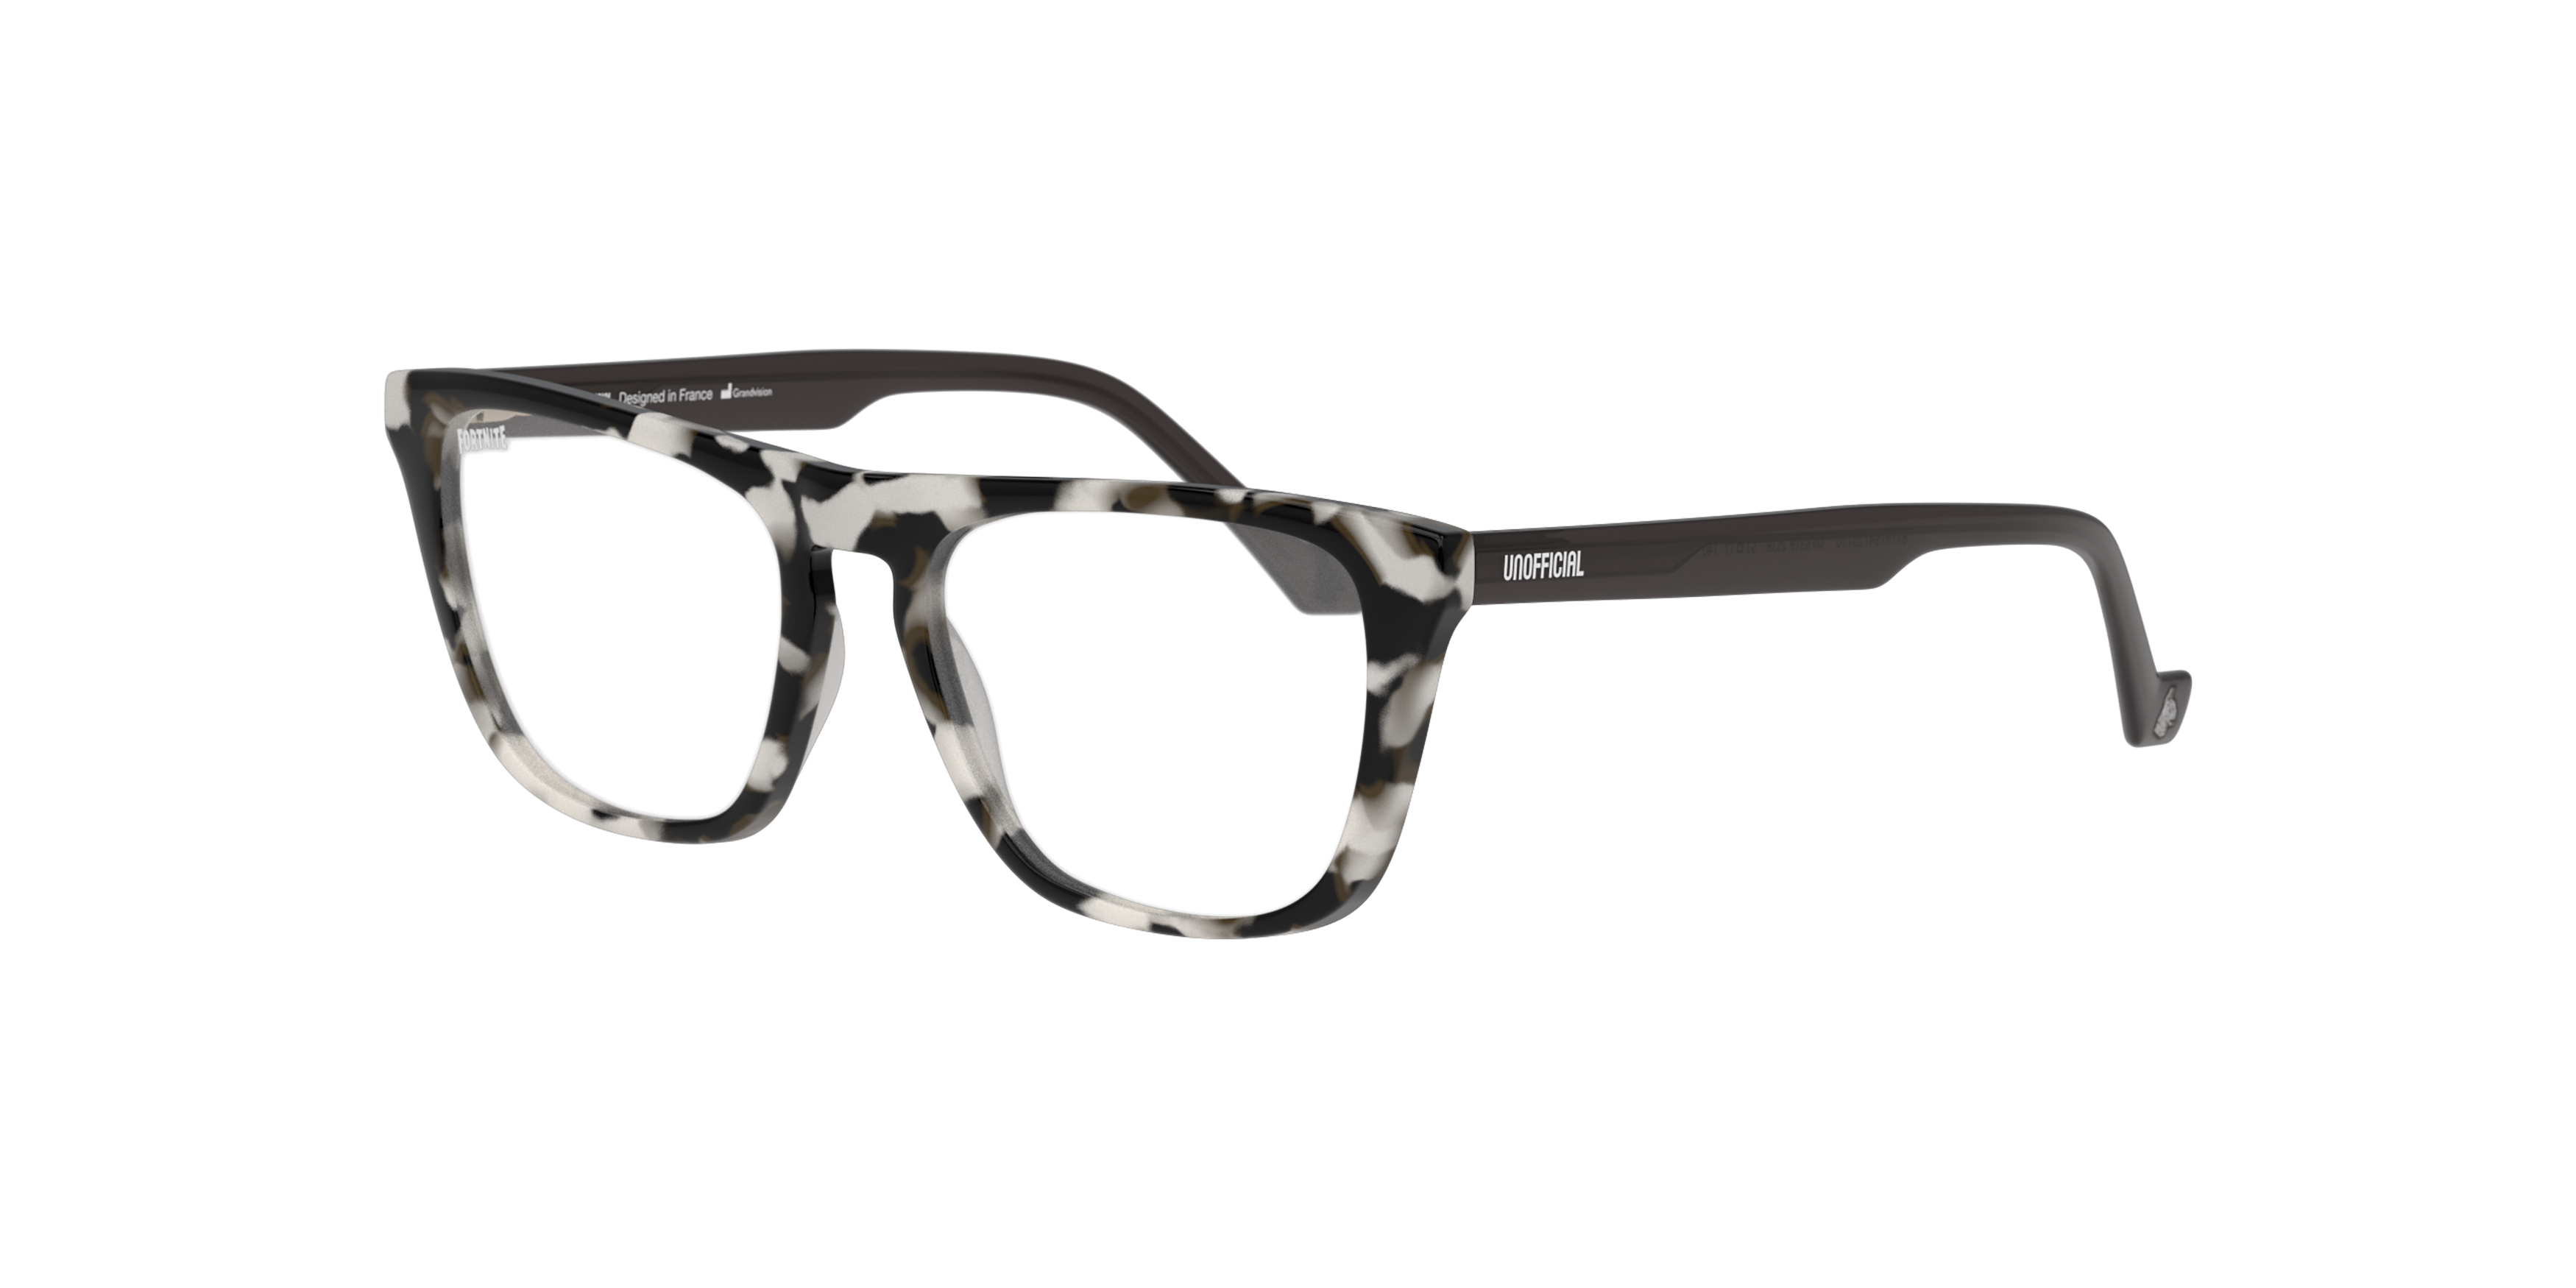 Angle_Left01 Fortnite with Unofficial UNSU0157 Glasses Transparent / Grey